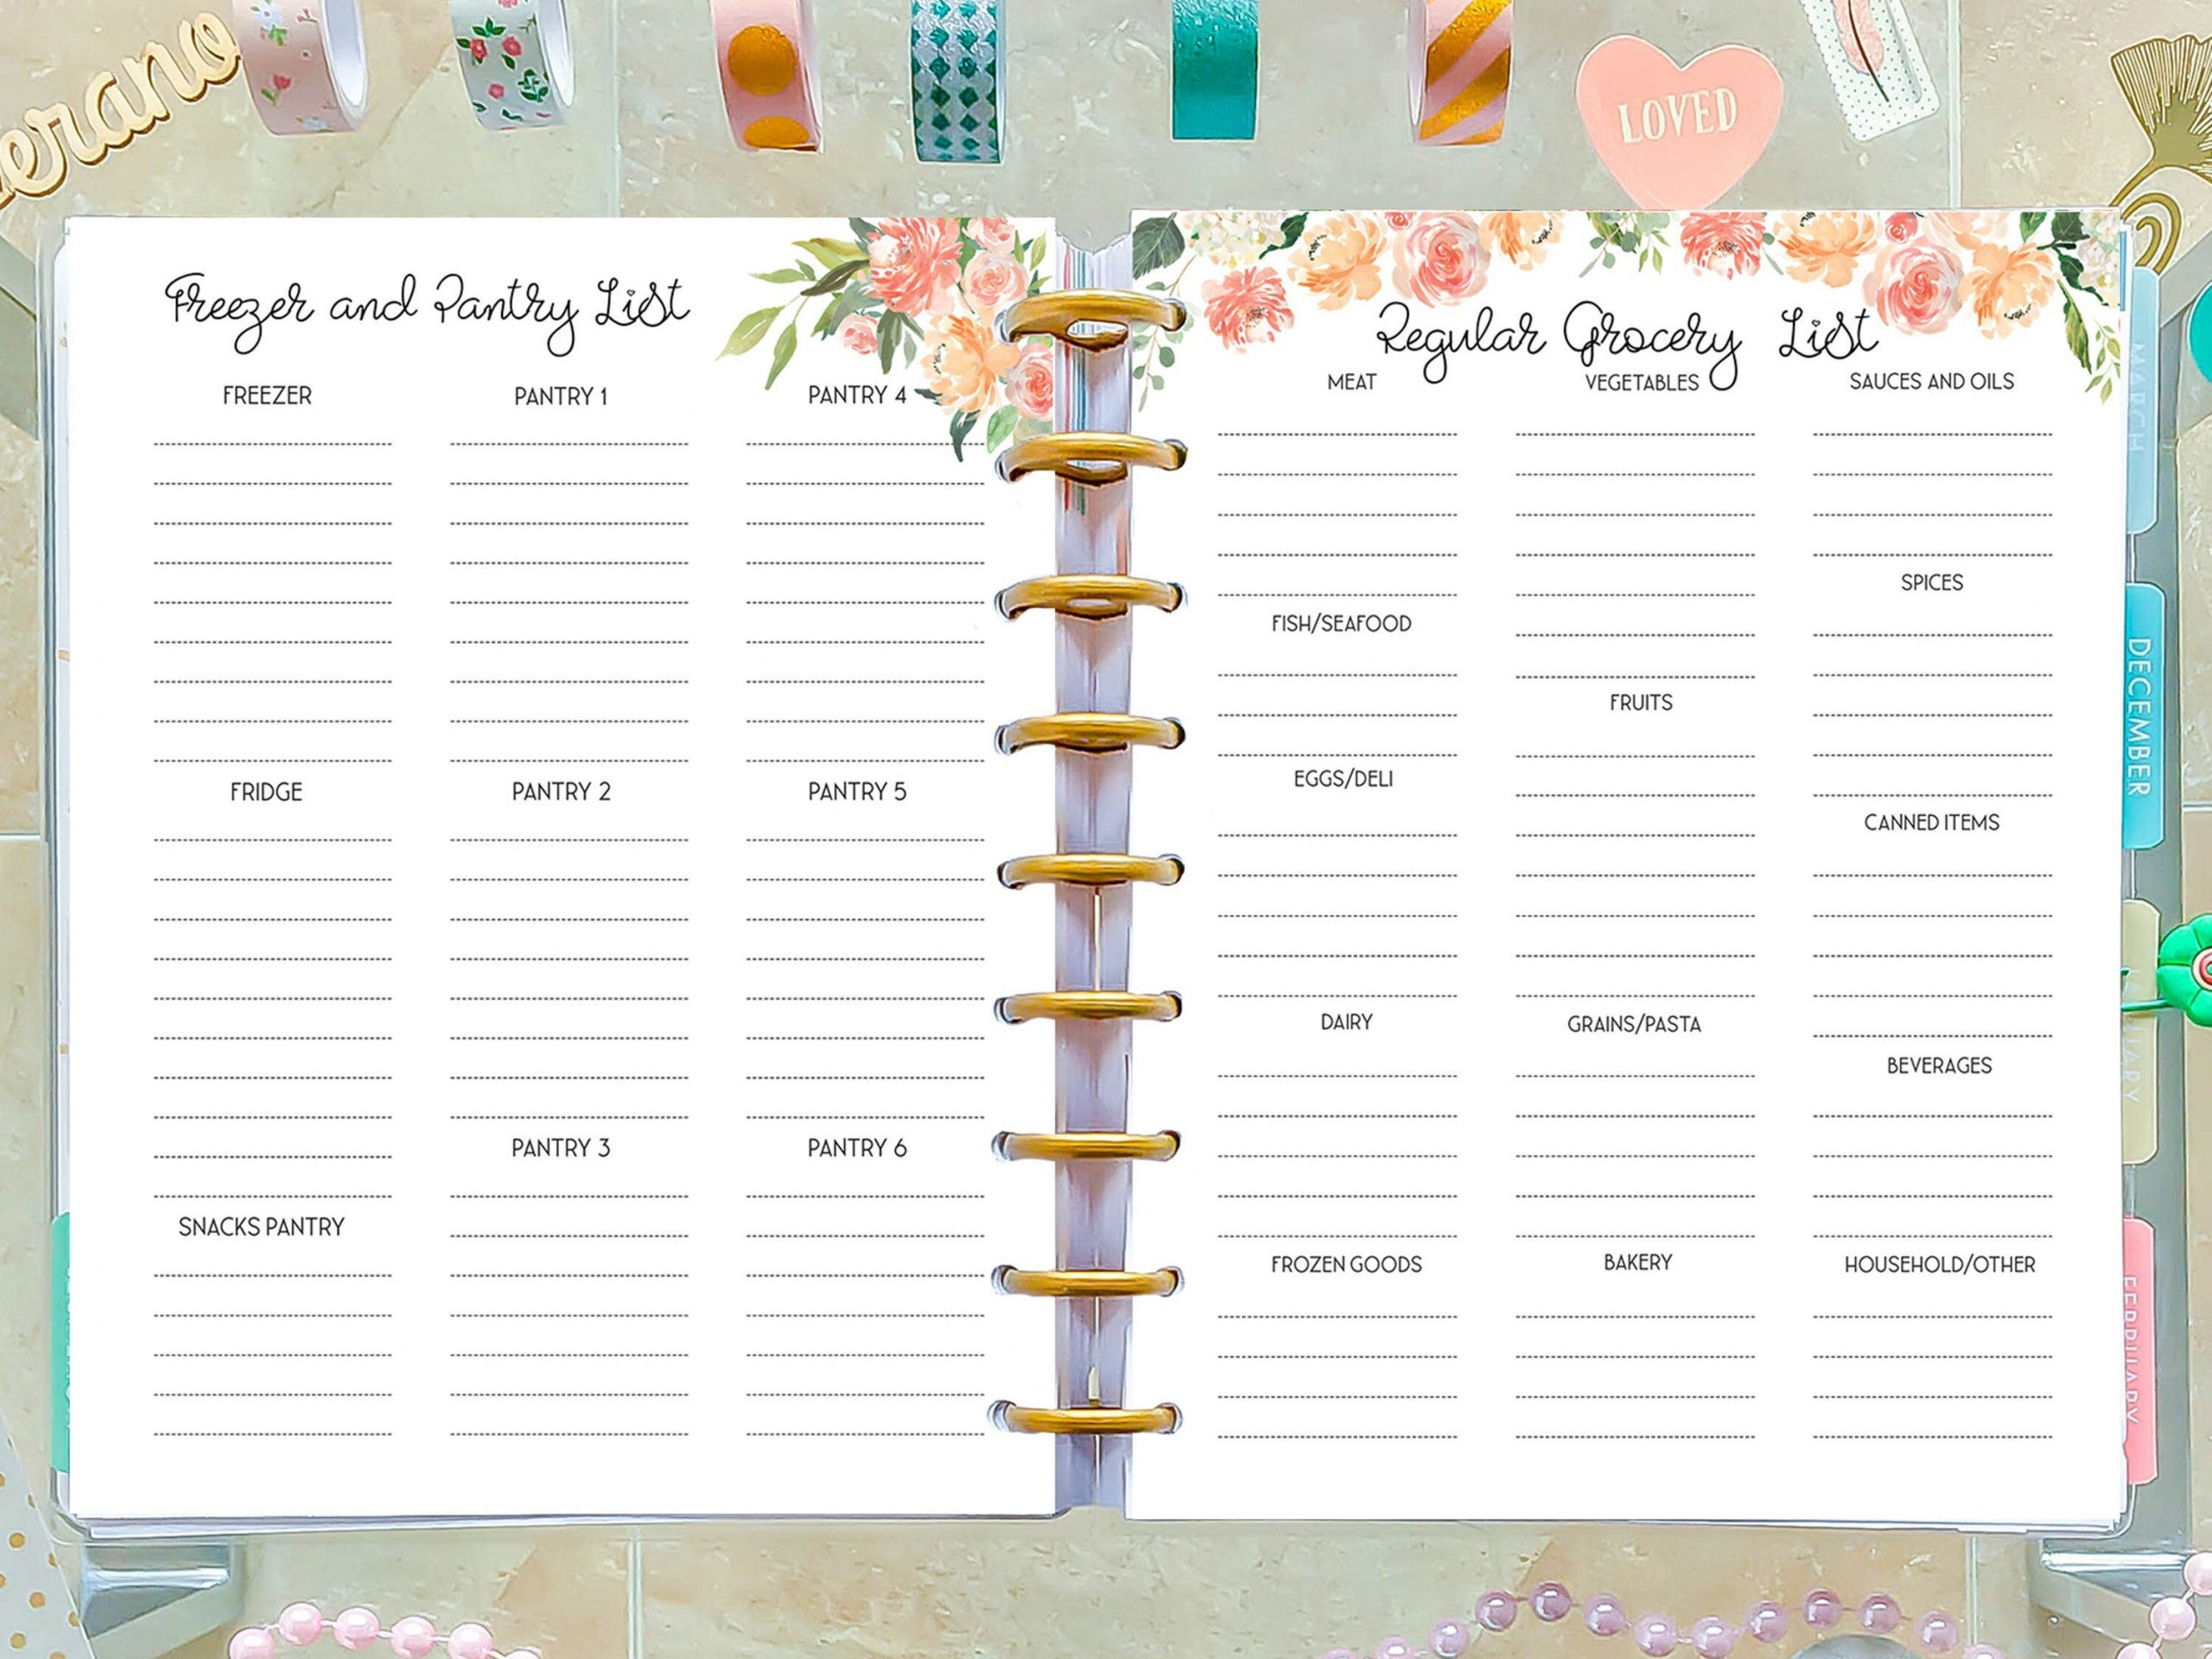 Weekly Meal Plan Made To Fit Happy Planner Inserts